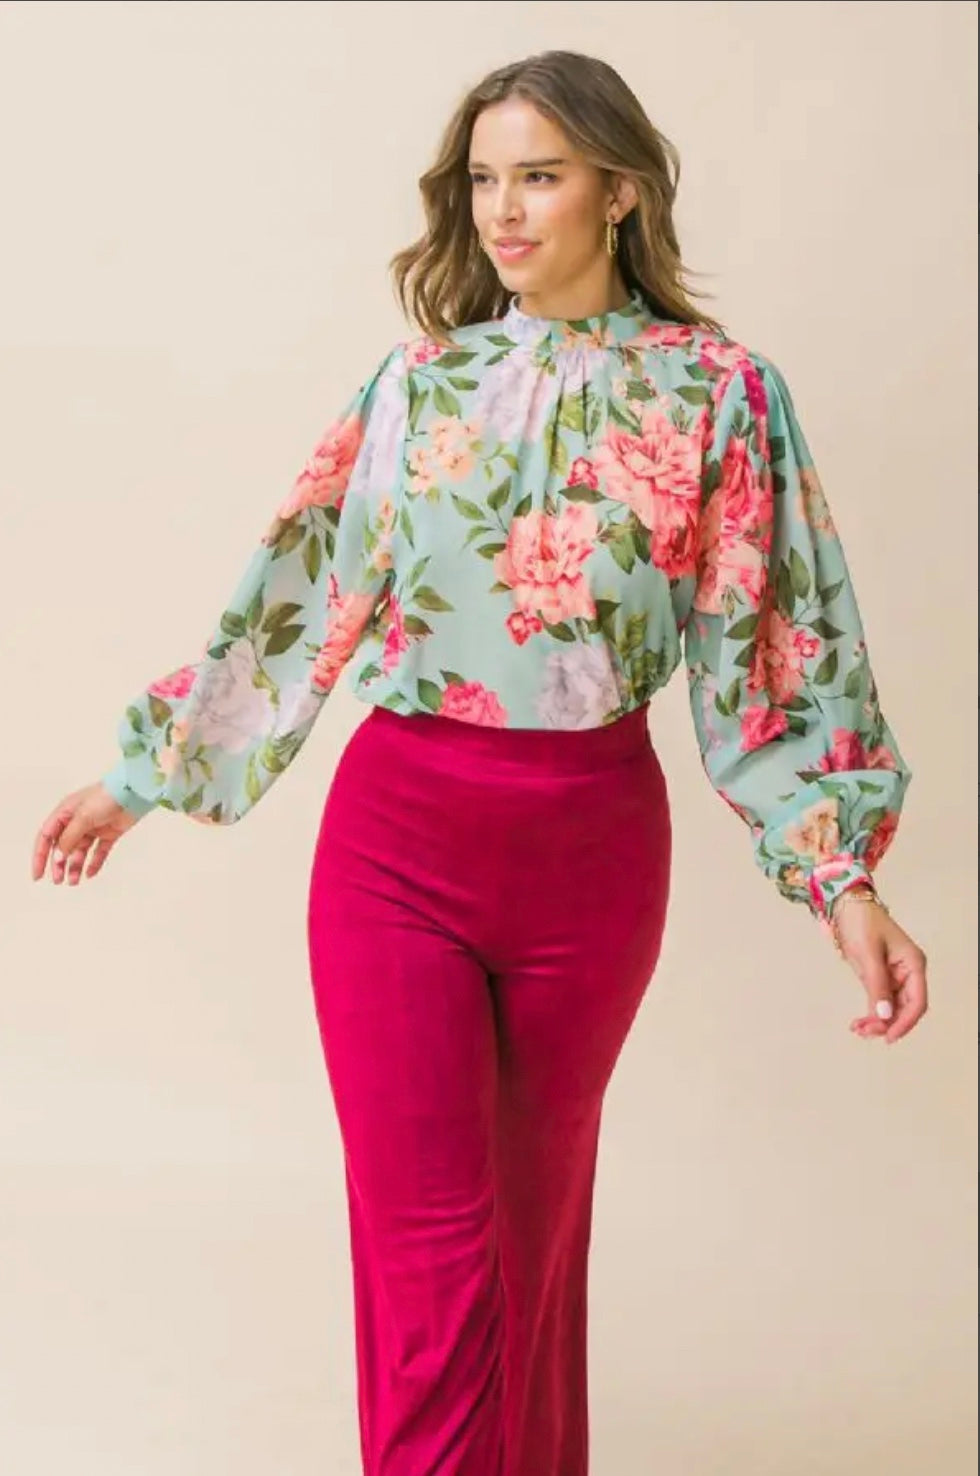 A Printed Floral Woven Top